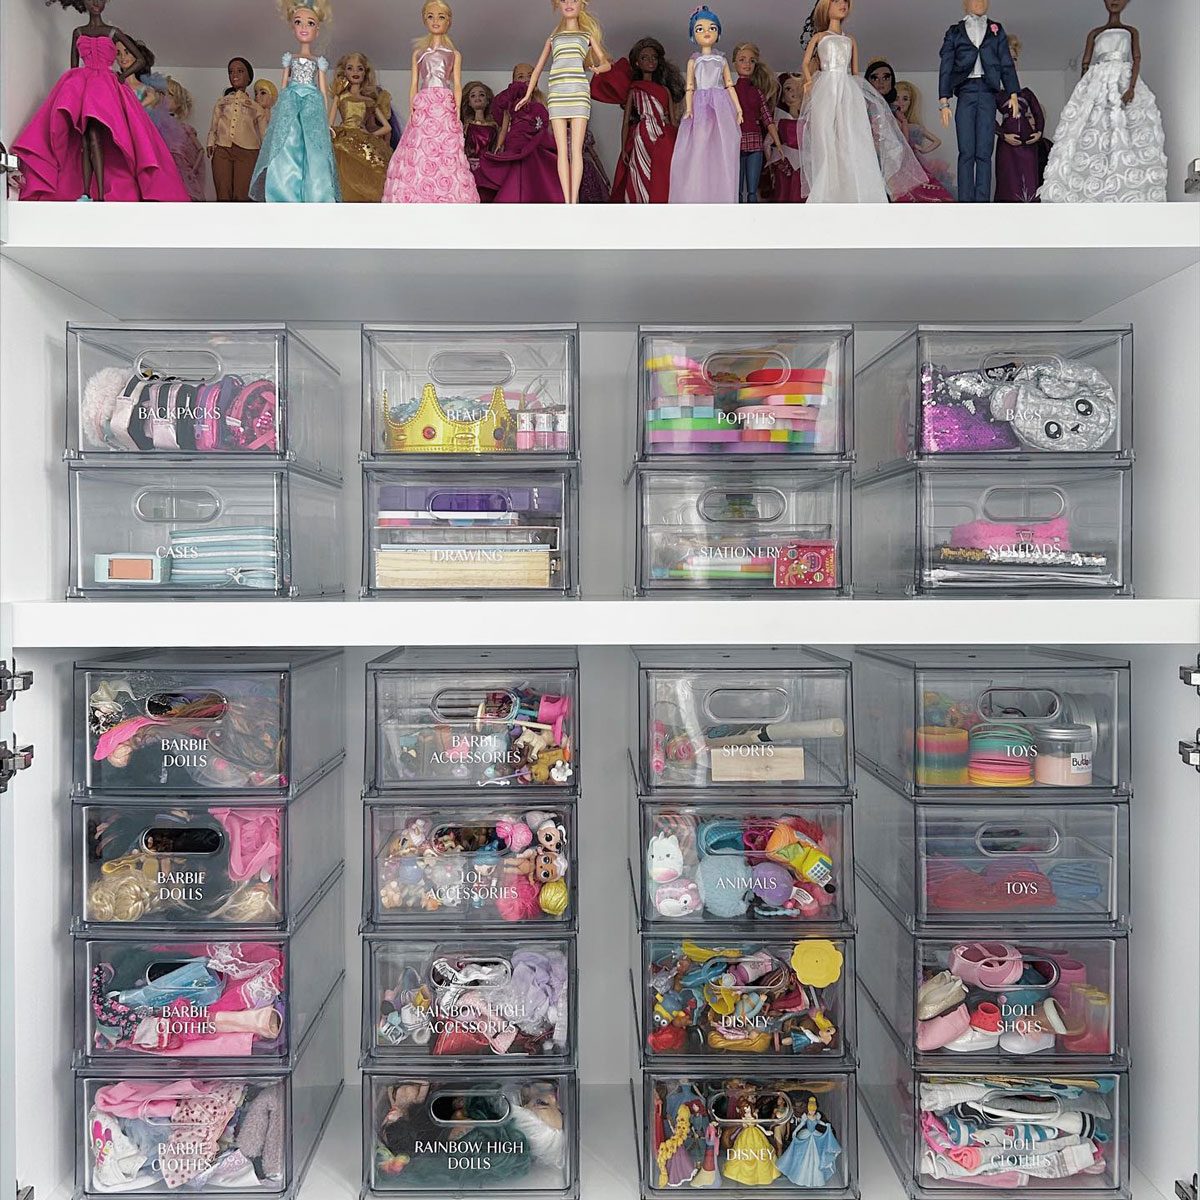 The Best Baby Doll for a 1 Year Old (And Baby Doll Storage Ideas!)